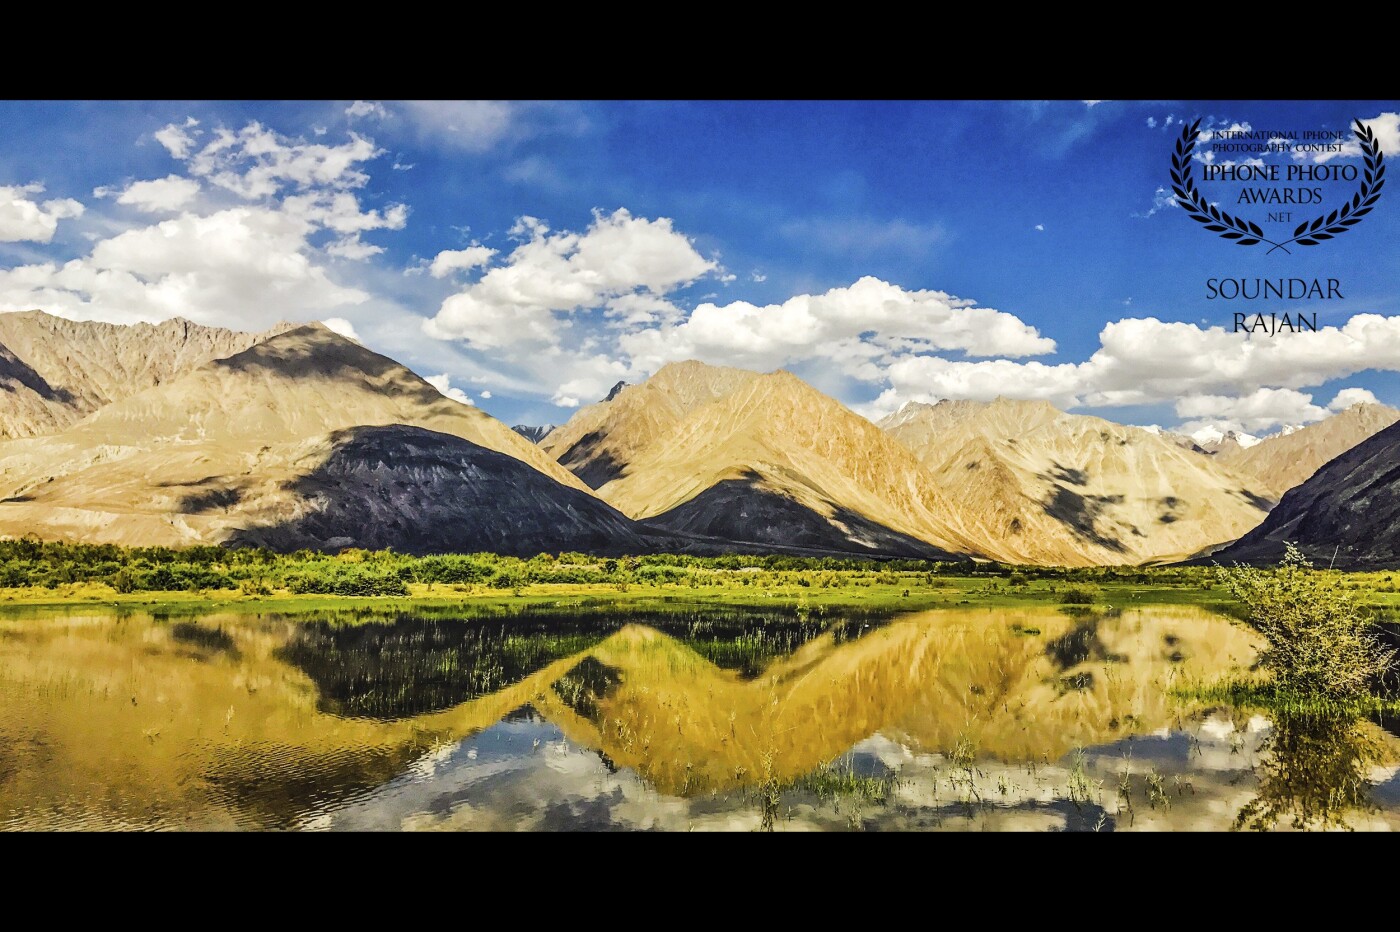 On my way, Nubra valley, this mirror imaging of a lake gives us an amazing shot and it is photographer paradise <br />
<br />
Ask anyone who clicks, they would have stopped at this stop to shoot 